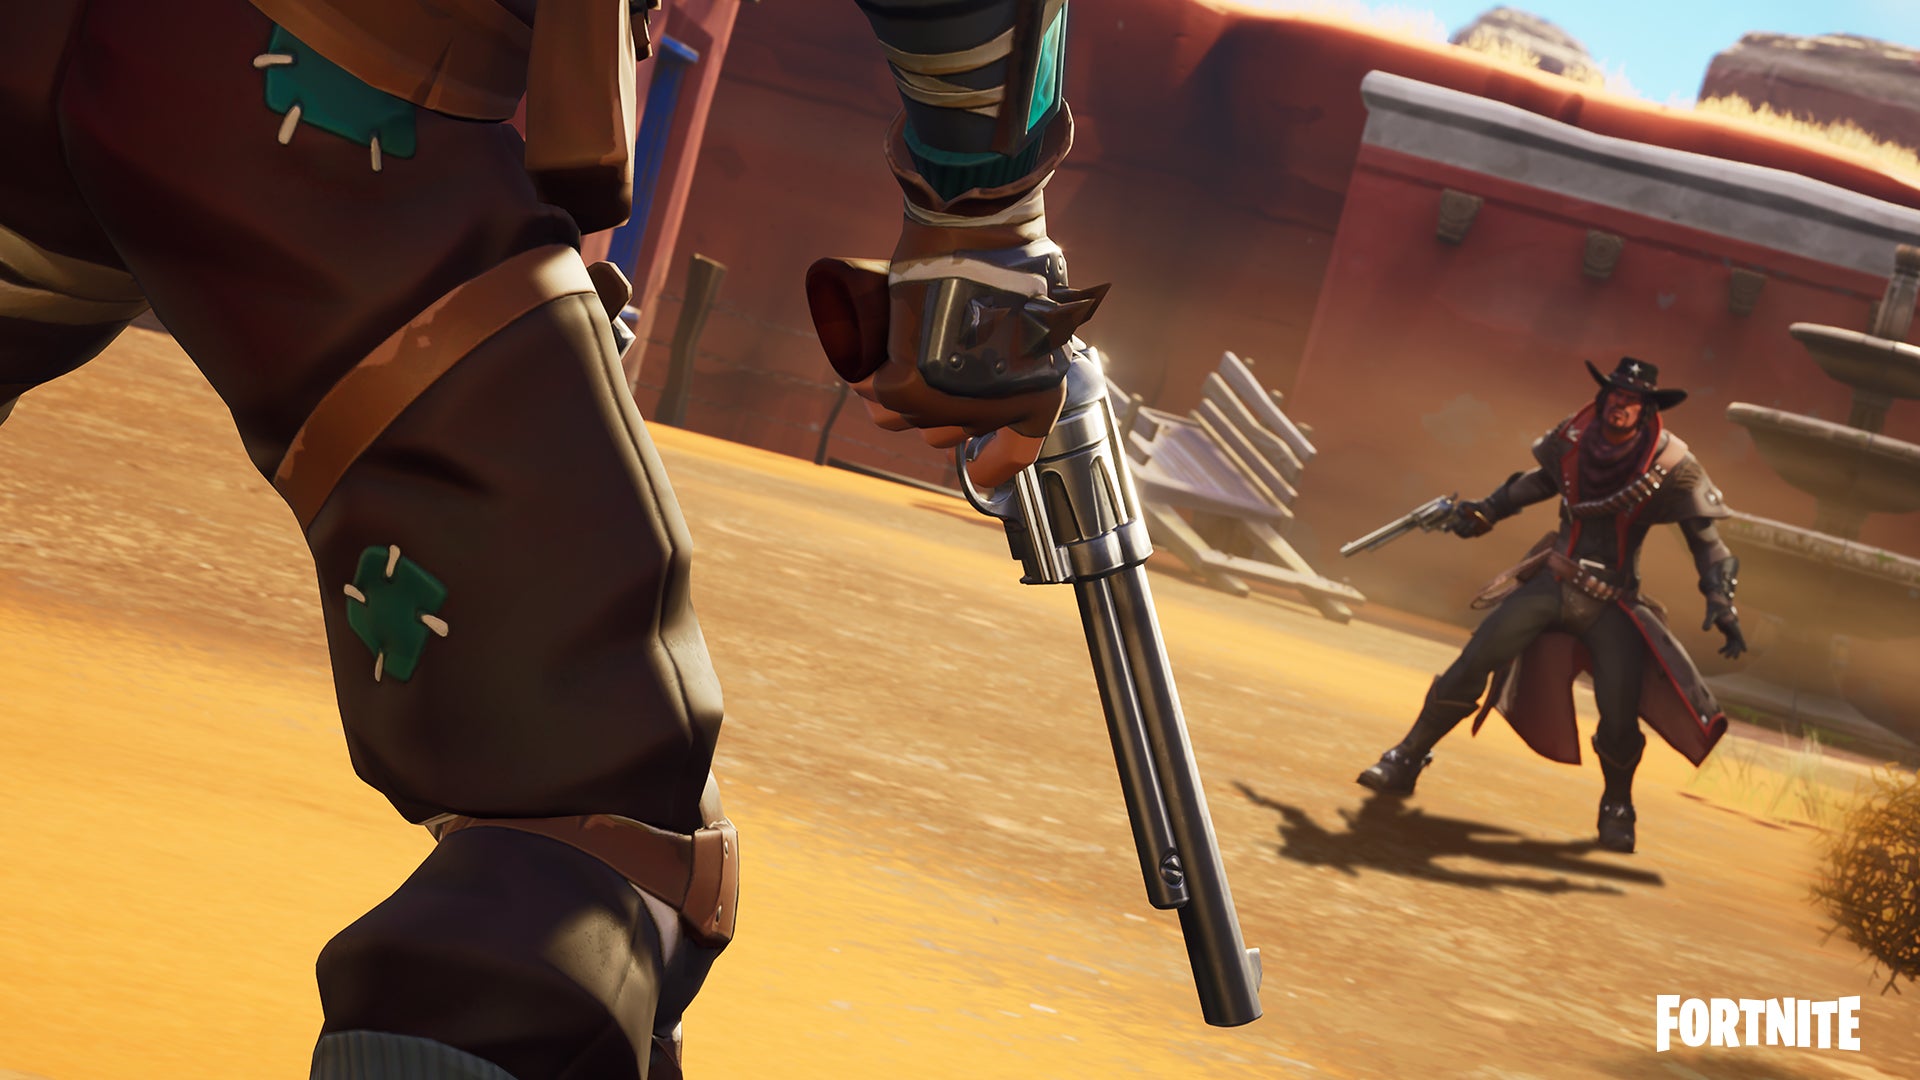 Image for Fortnite v6.30 content update: Dynamite temporarily disabled, Wild West LTM and Ghost Pistol added